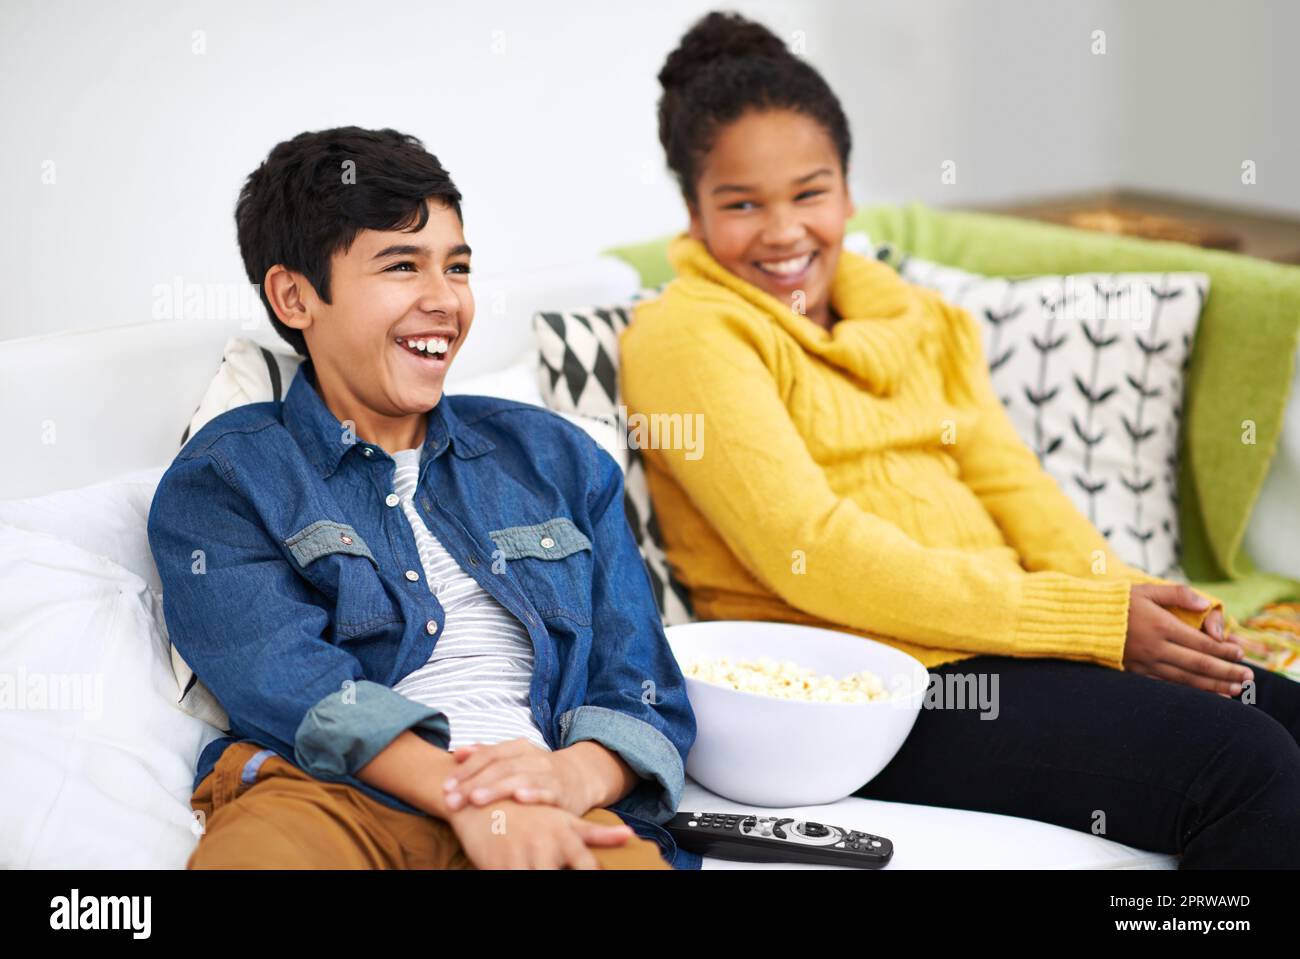 This is one funny flick. ethnic siblings holding a bowl of popcorn. Stock Photo